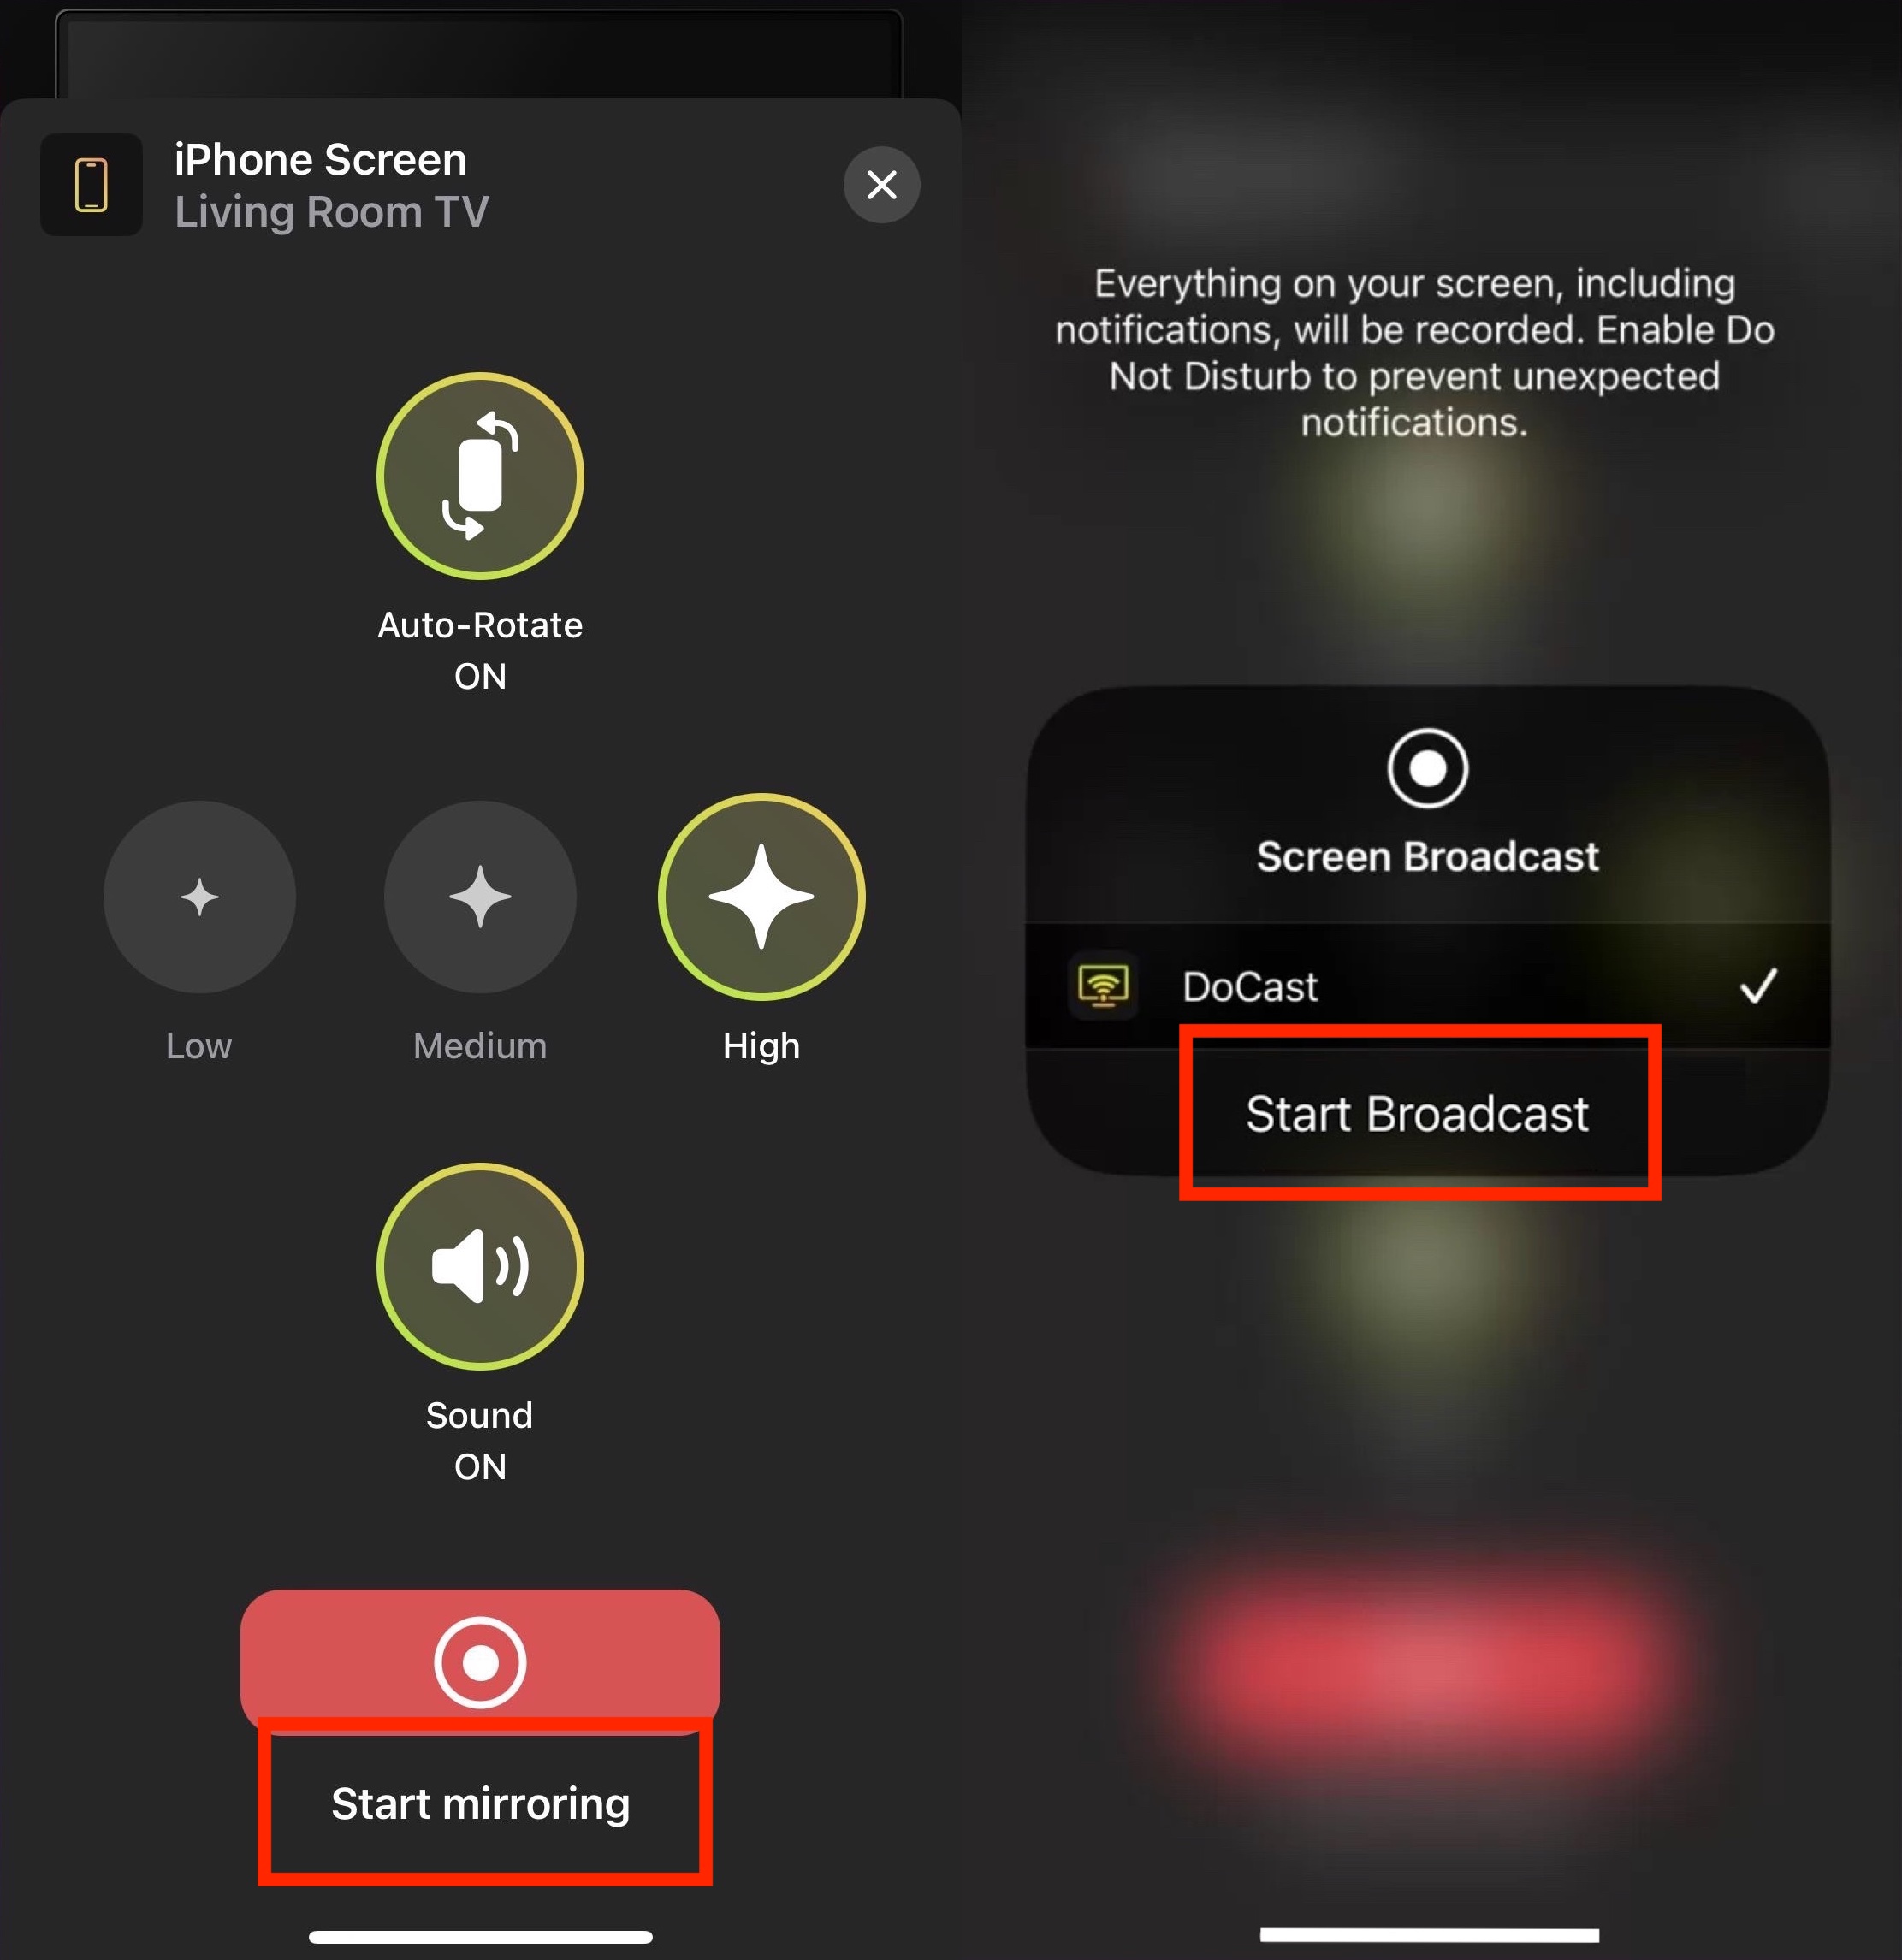 Tap on the Start mirroring and Start Broadcast buttons on DoCast